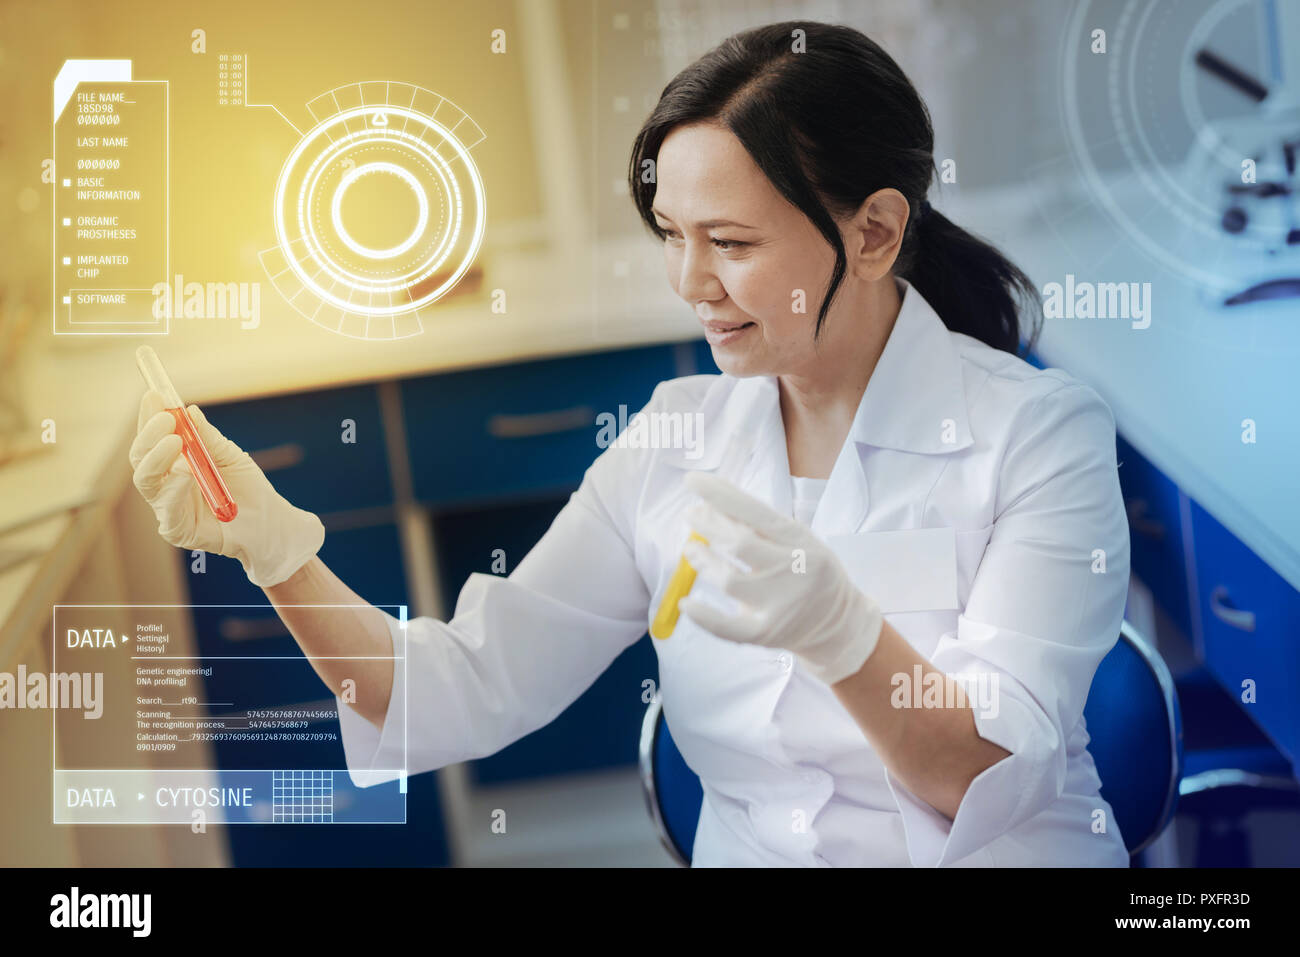 Curious chemist sitting in the lab and holding two test tubes Stock Photo